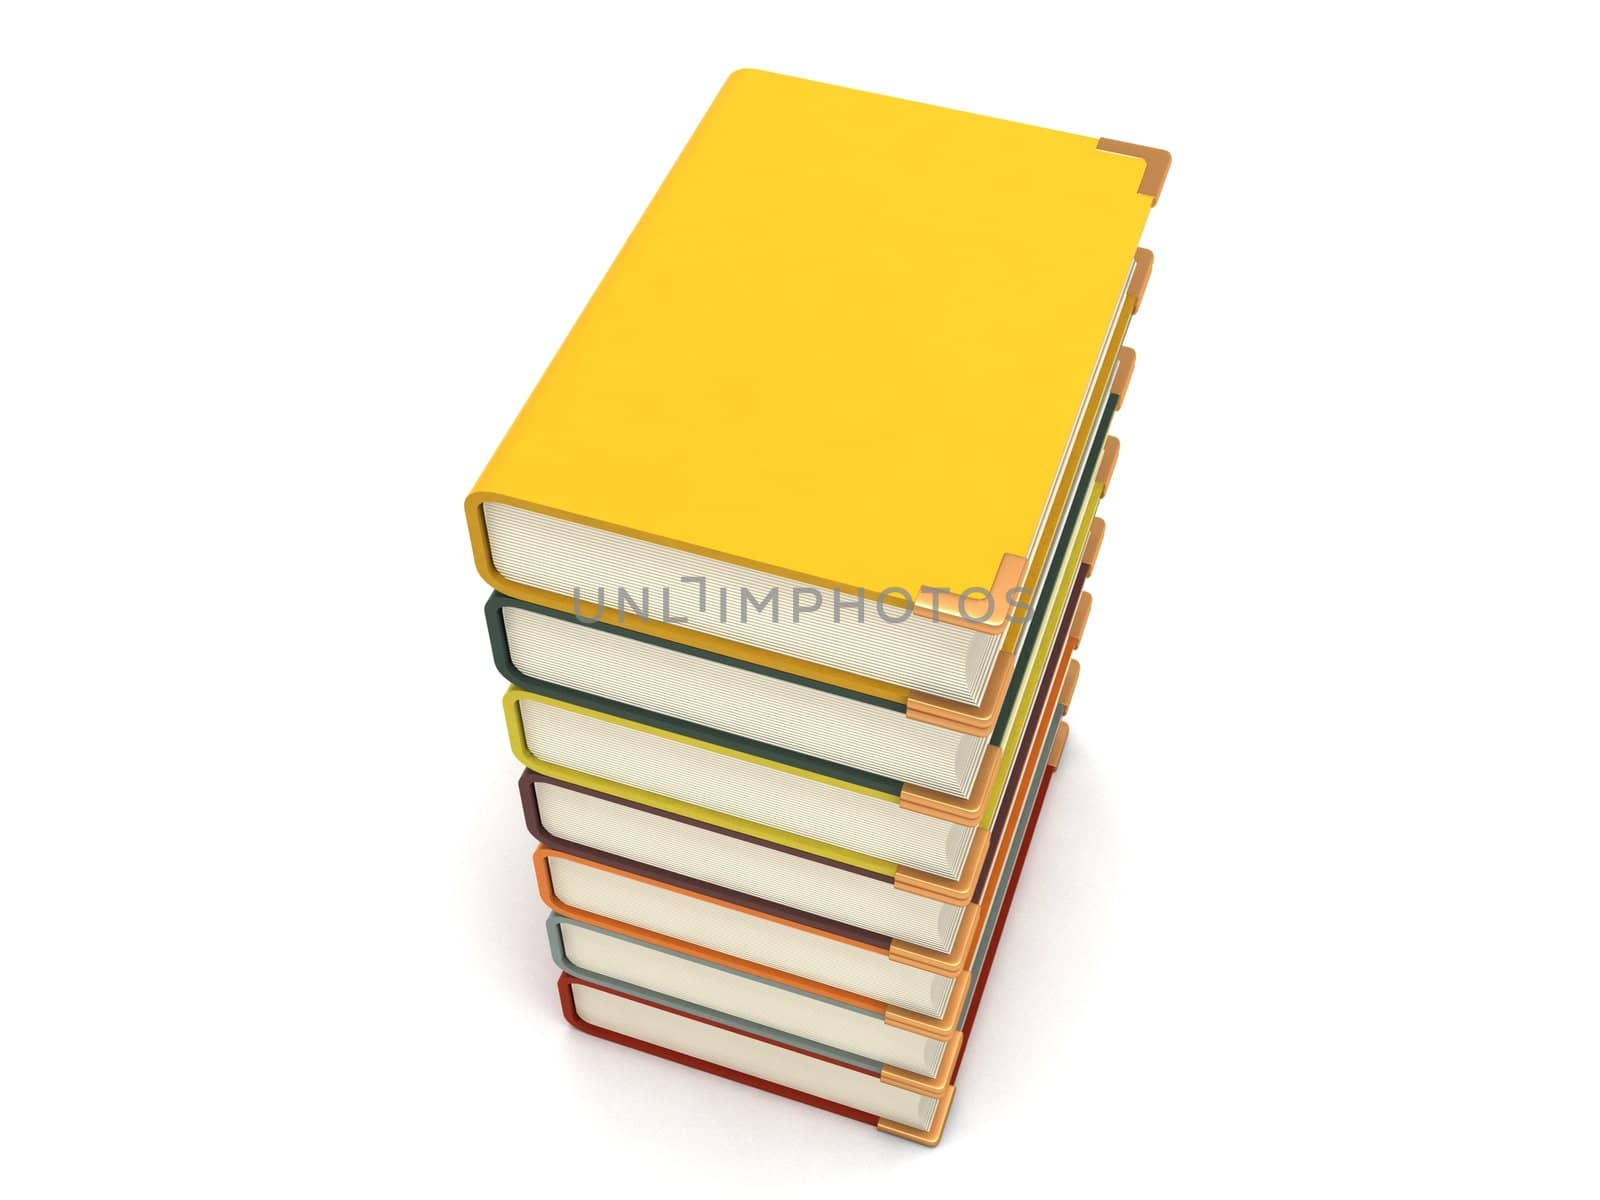 three dimensional pileup books with white background